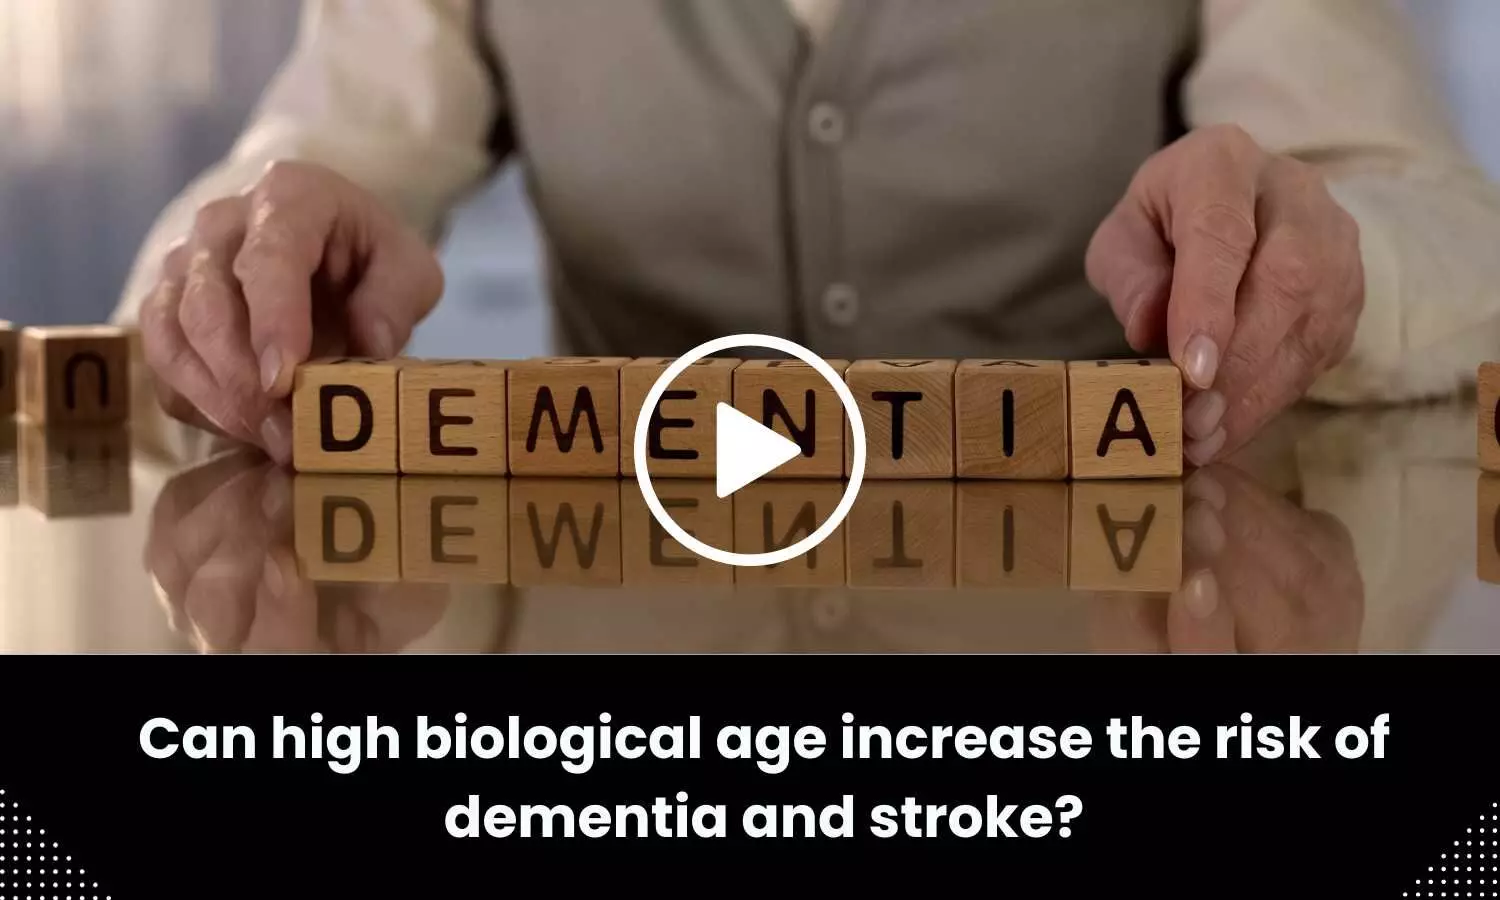 Can high biological age increase the risk of dementia and stroke?